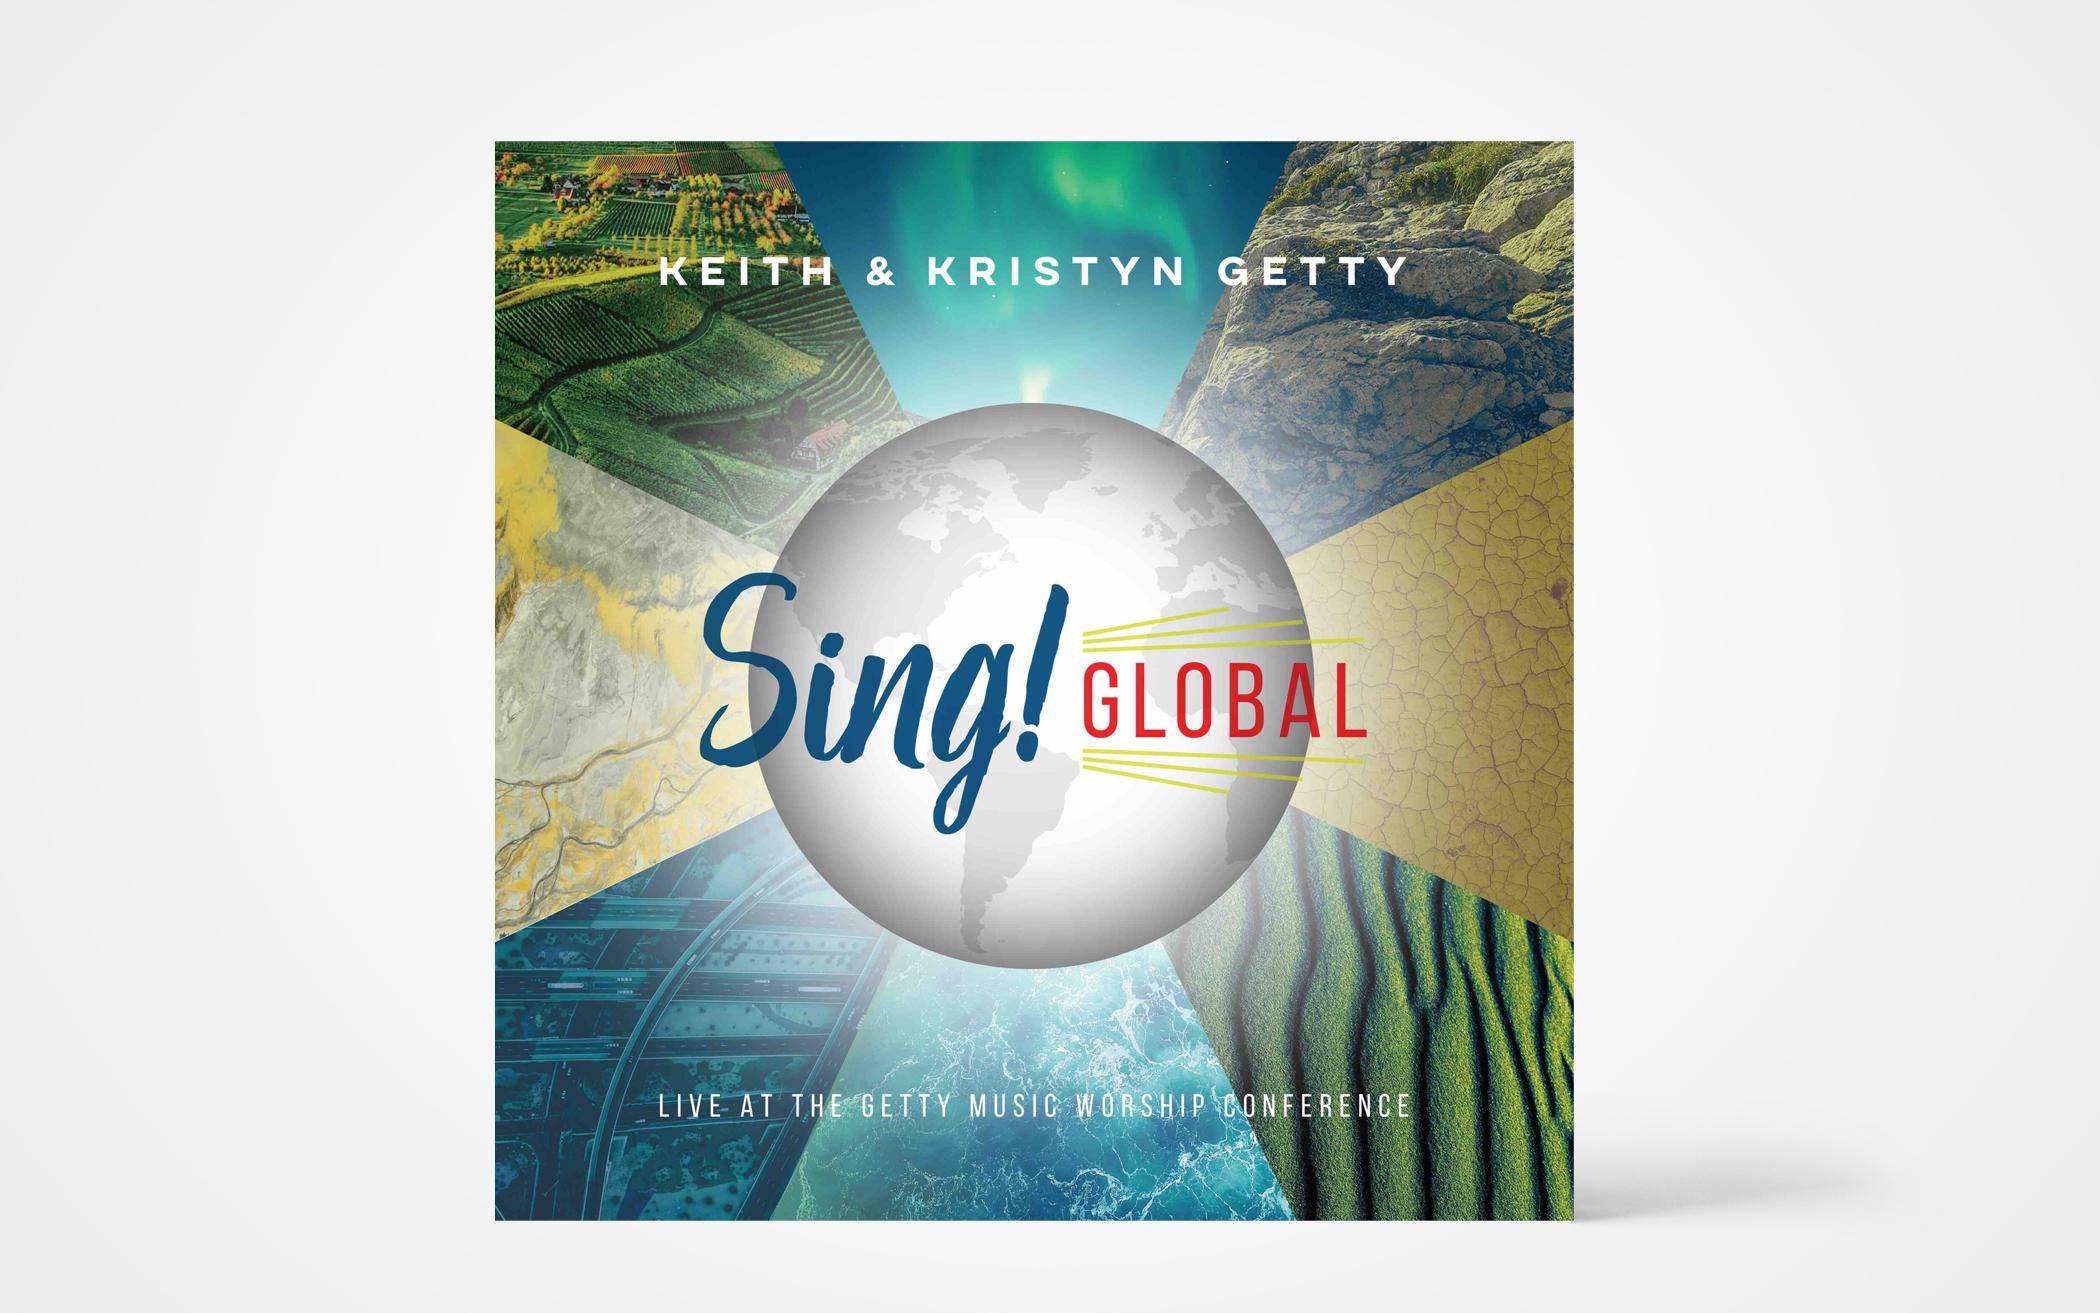 Sing! Global – Live at the Getty Music Worship Conference